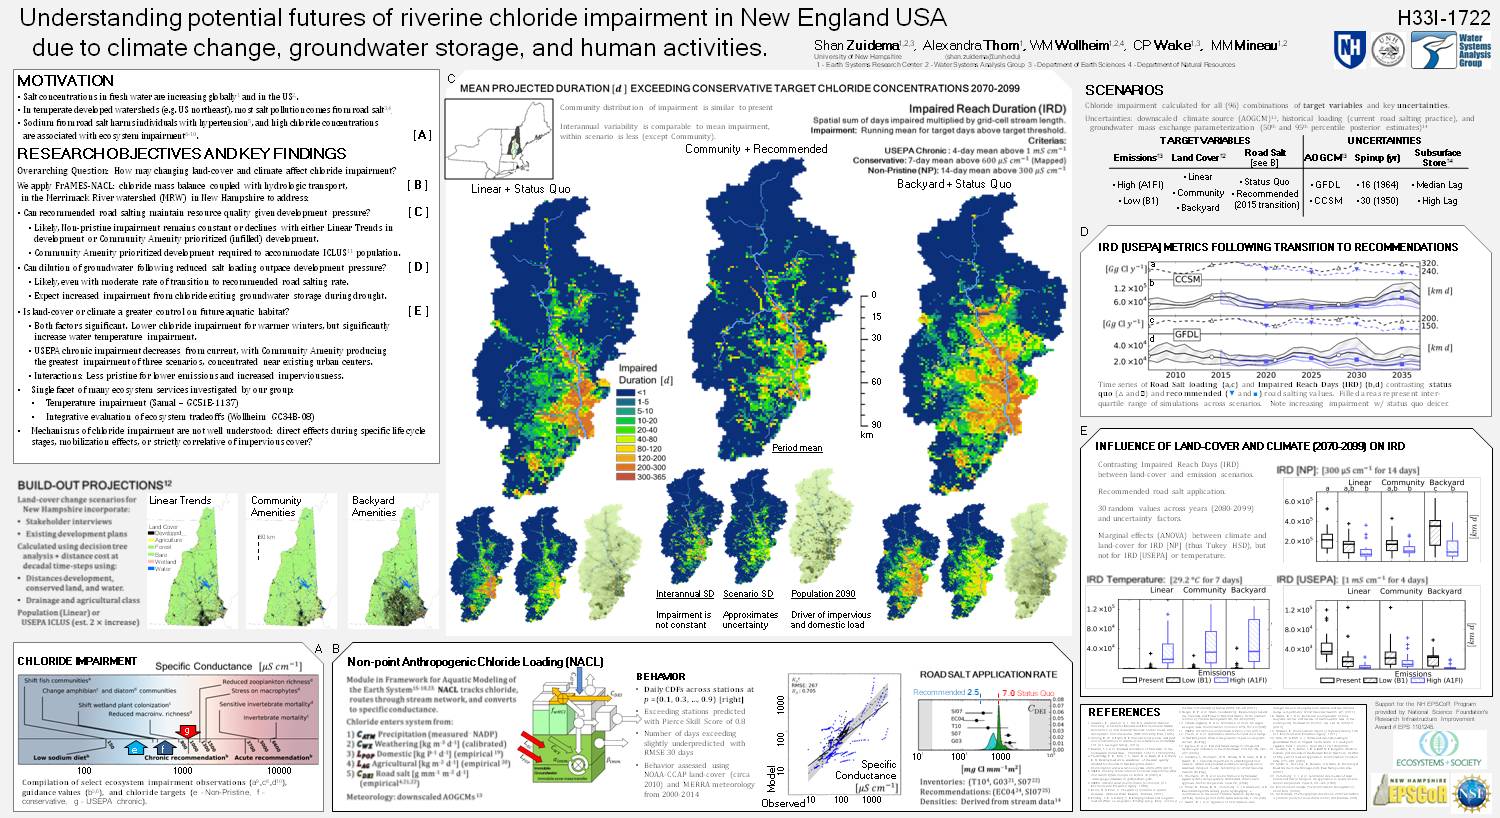 Understanding Potential Futures Of Riverine Chloride Impairment In New England Usa   Due To Climate Change, Groundwater Storage, And Human Activities by szuidema